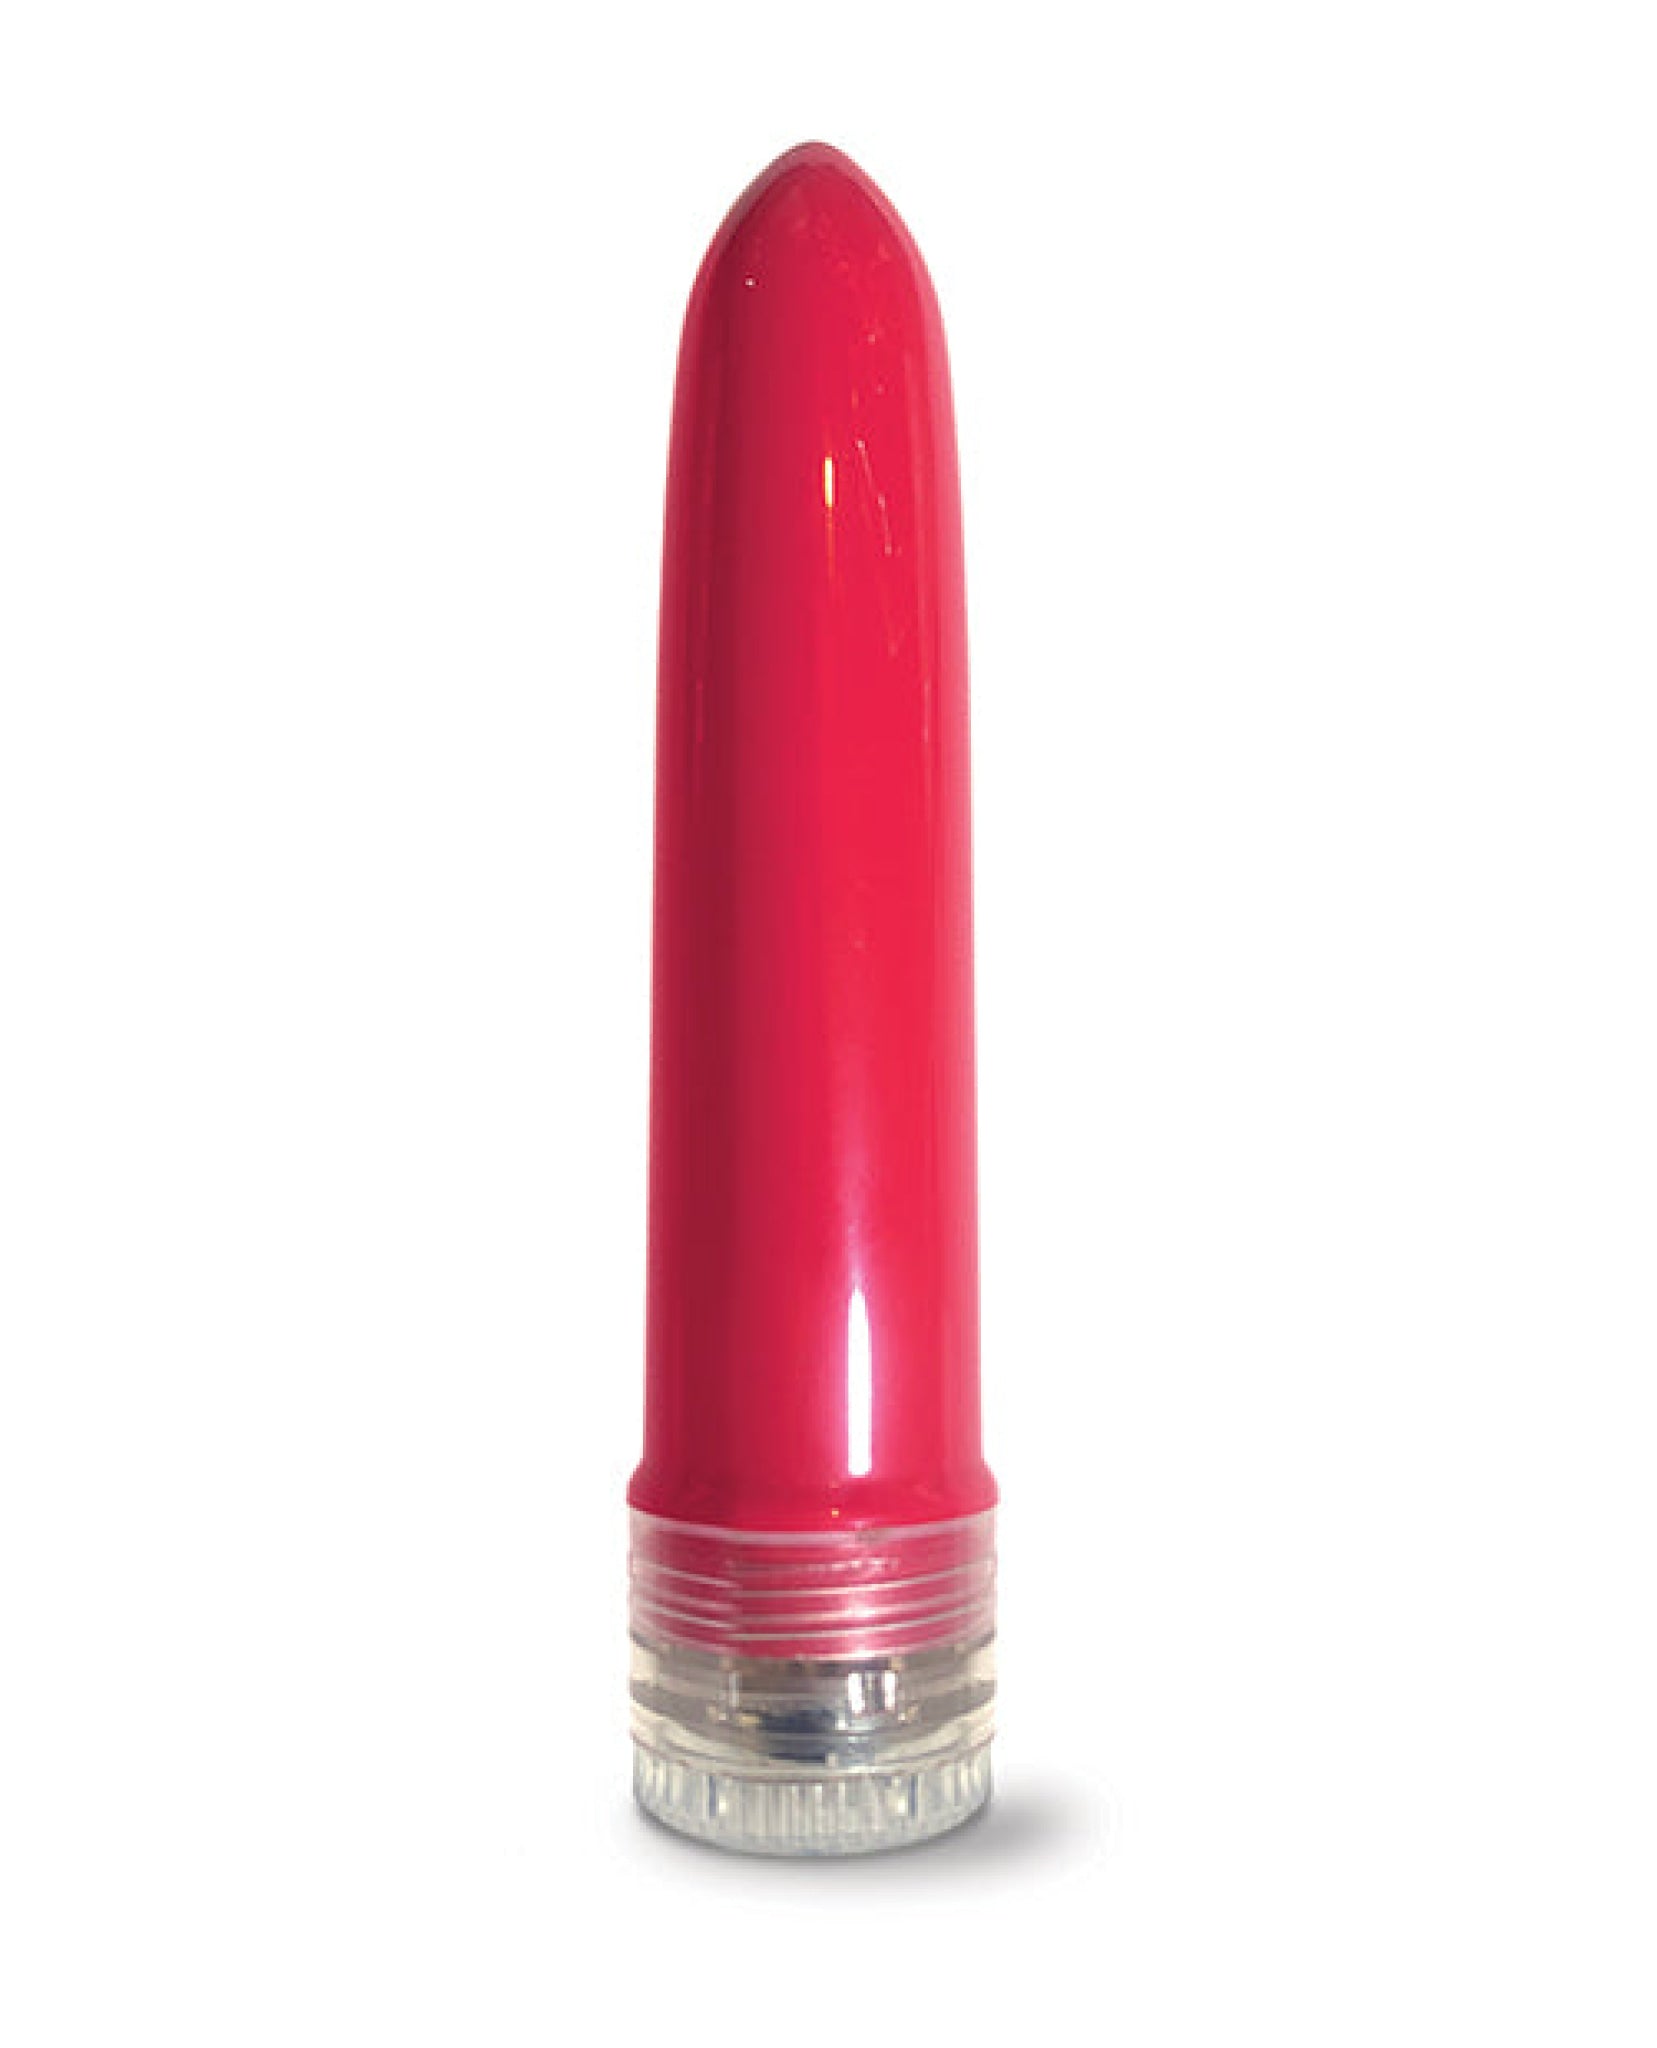 Pleasure Package I Didn't Know Your Size 4" Multi Speed Vibe  - Red The Happy Ending